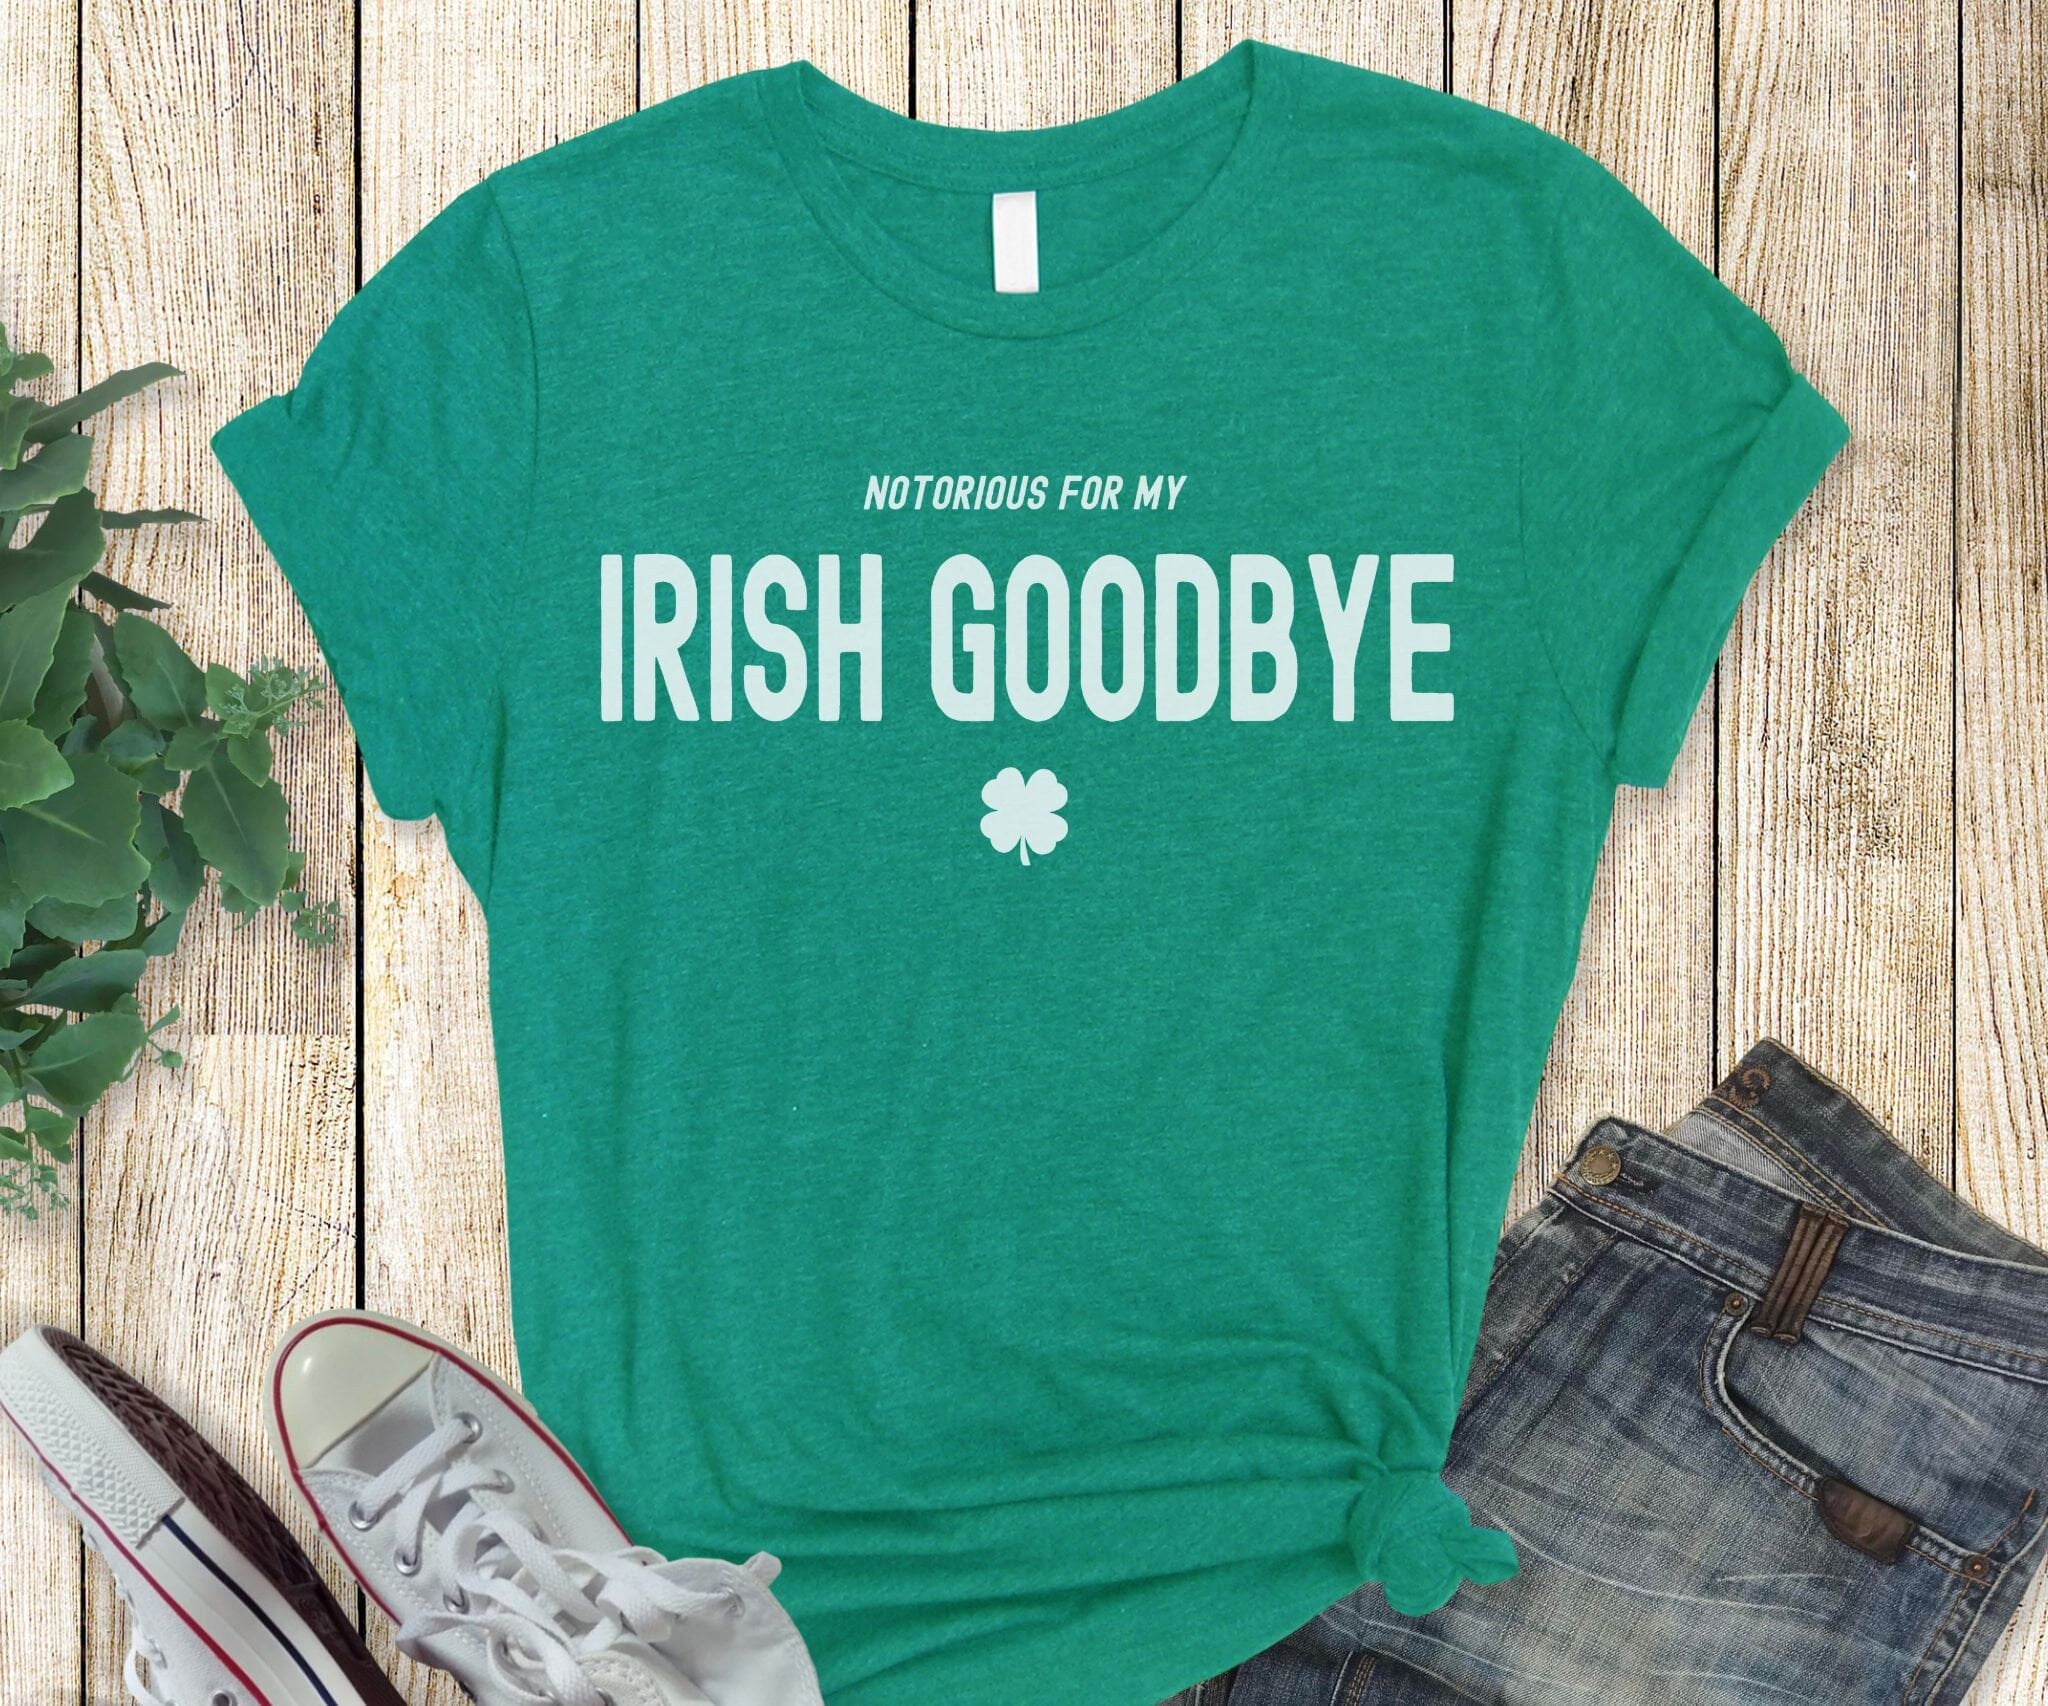 QIPOPIQ Clearance Womens Plus Size Tops St. Patrick's Day Casual Clothes  Funny Solide Fit Tee Shirts Blouse Solid Shirt with Shamrock 